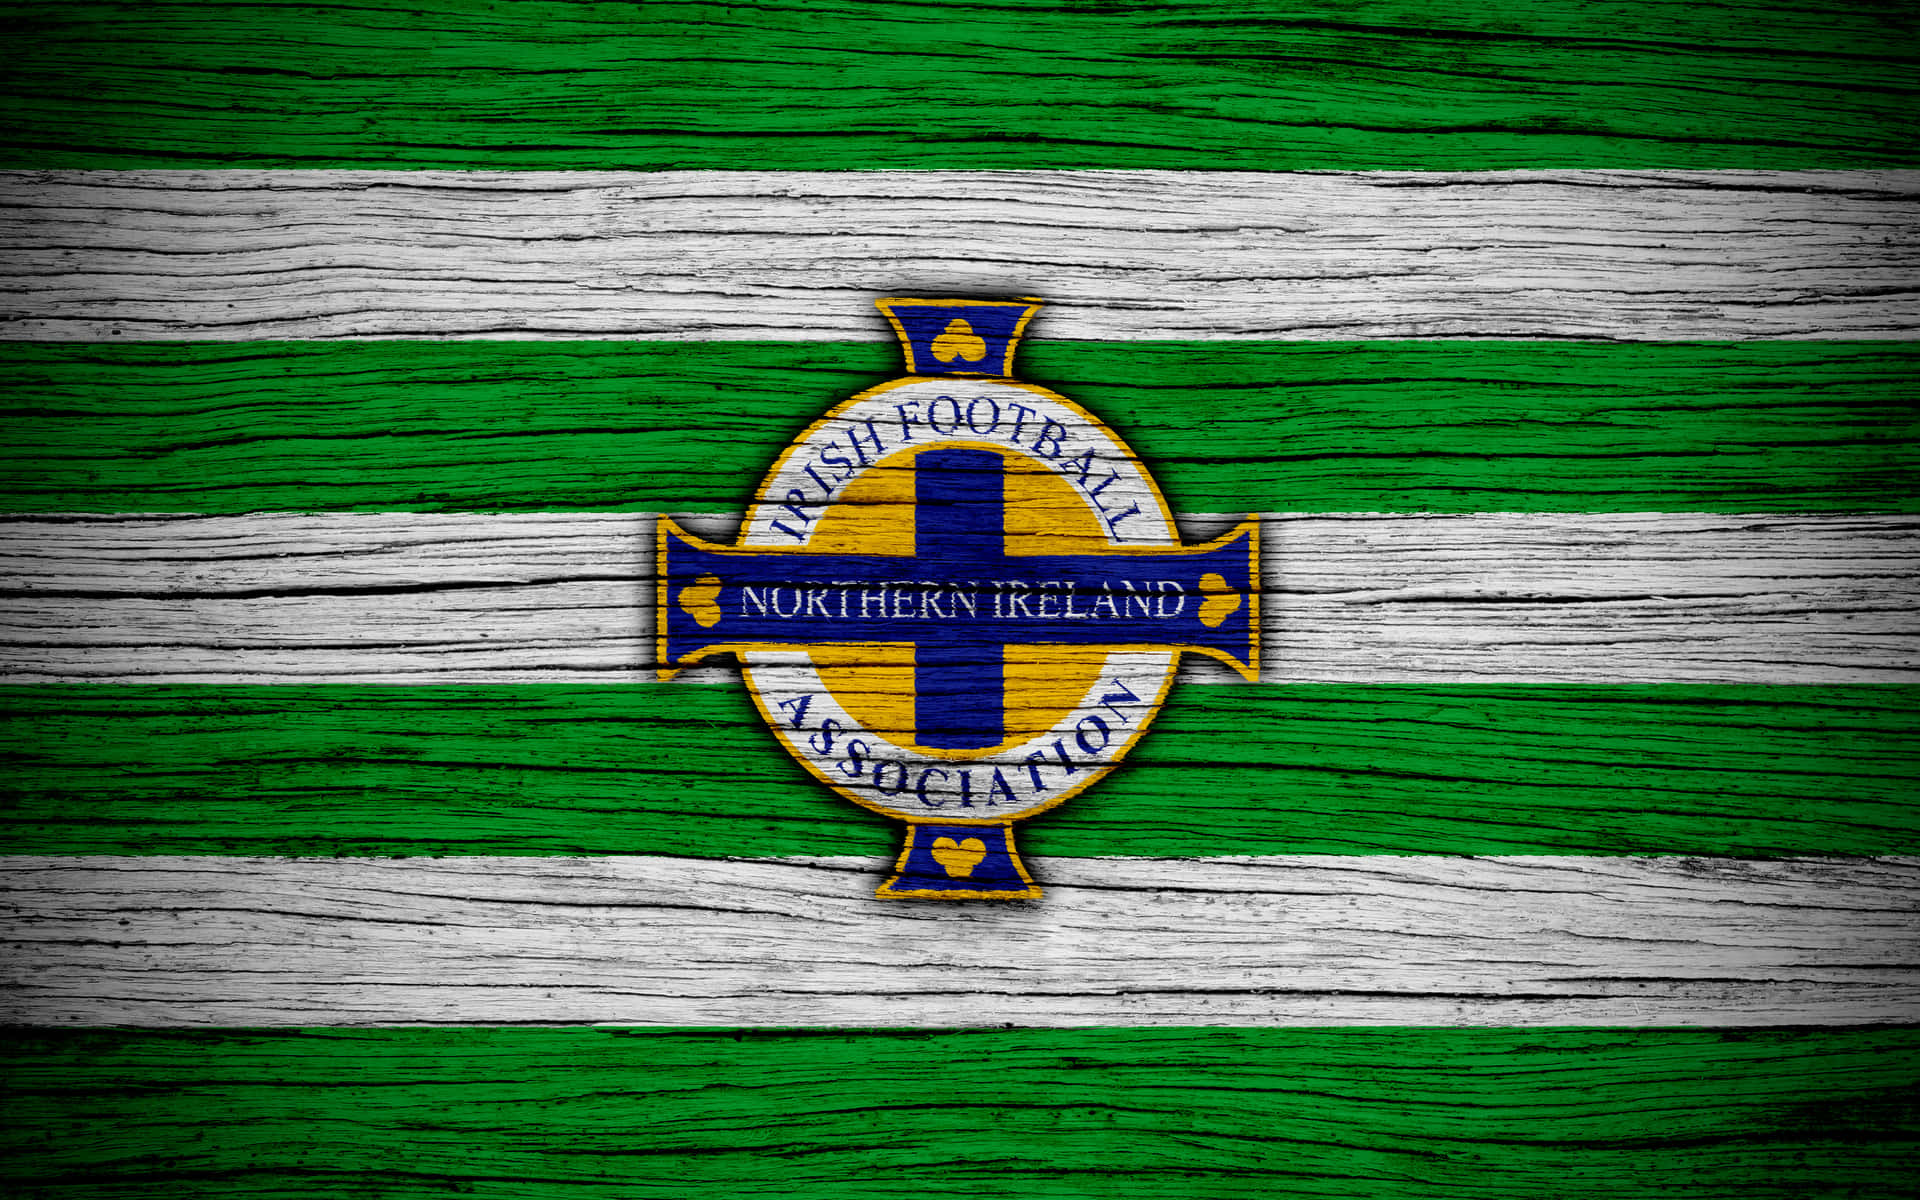 Northern Ireland Green And White Stripes Football Association Background